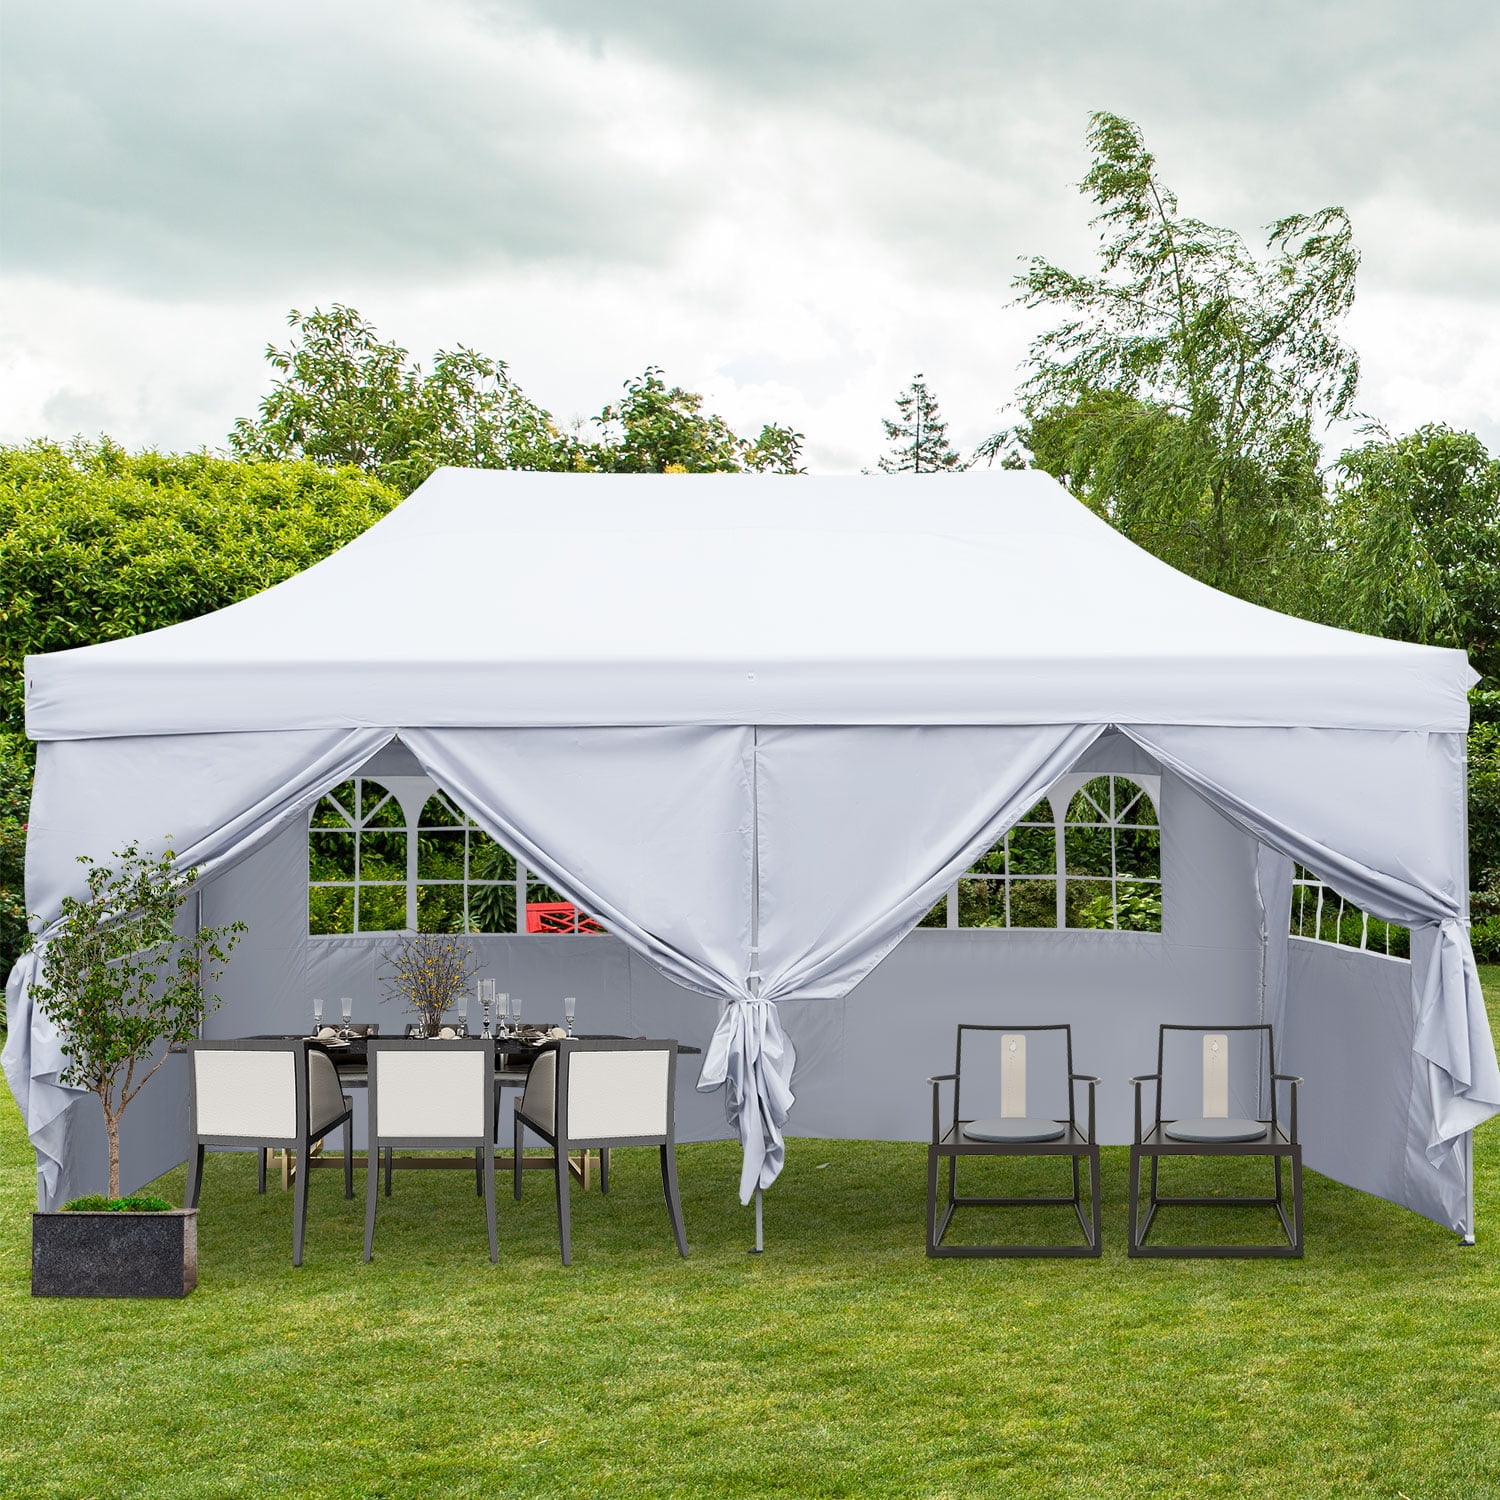 Pop-up Canopy – Water-resistant Outdoor Party Tent With Instant